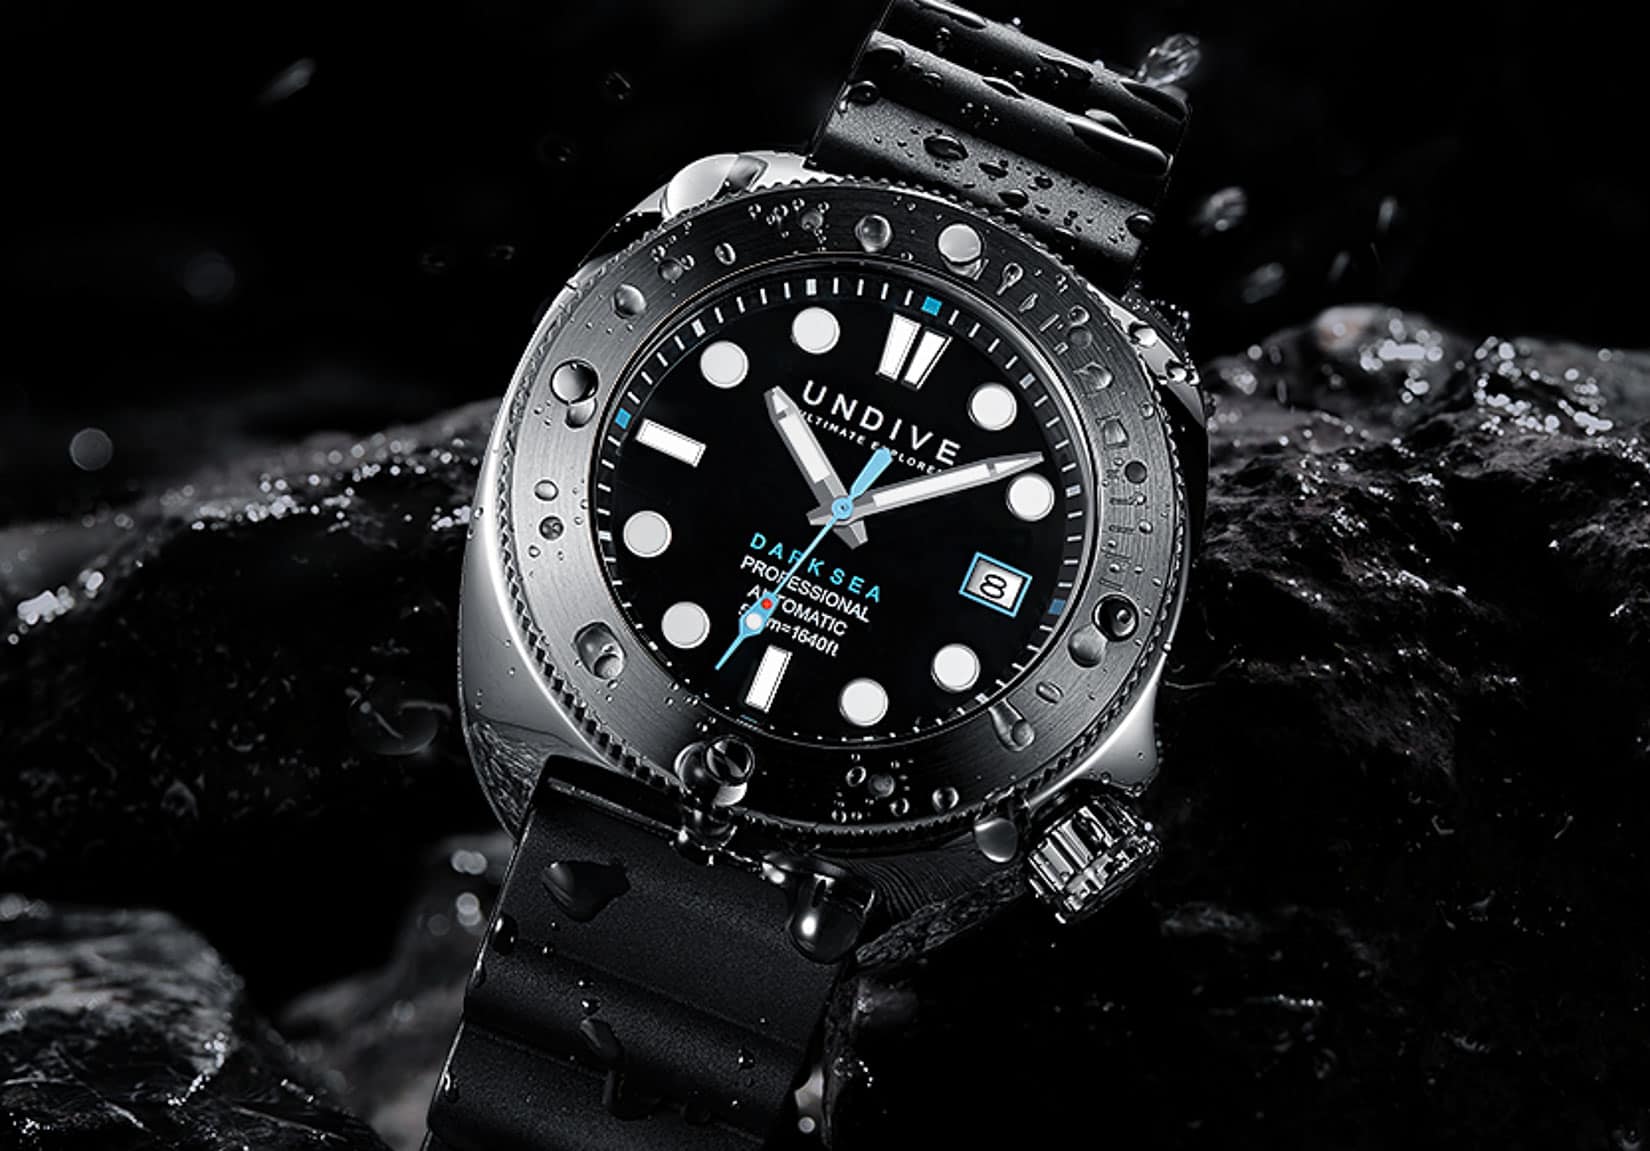 Introducing The Dark Sea 500m From Undive Watches